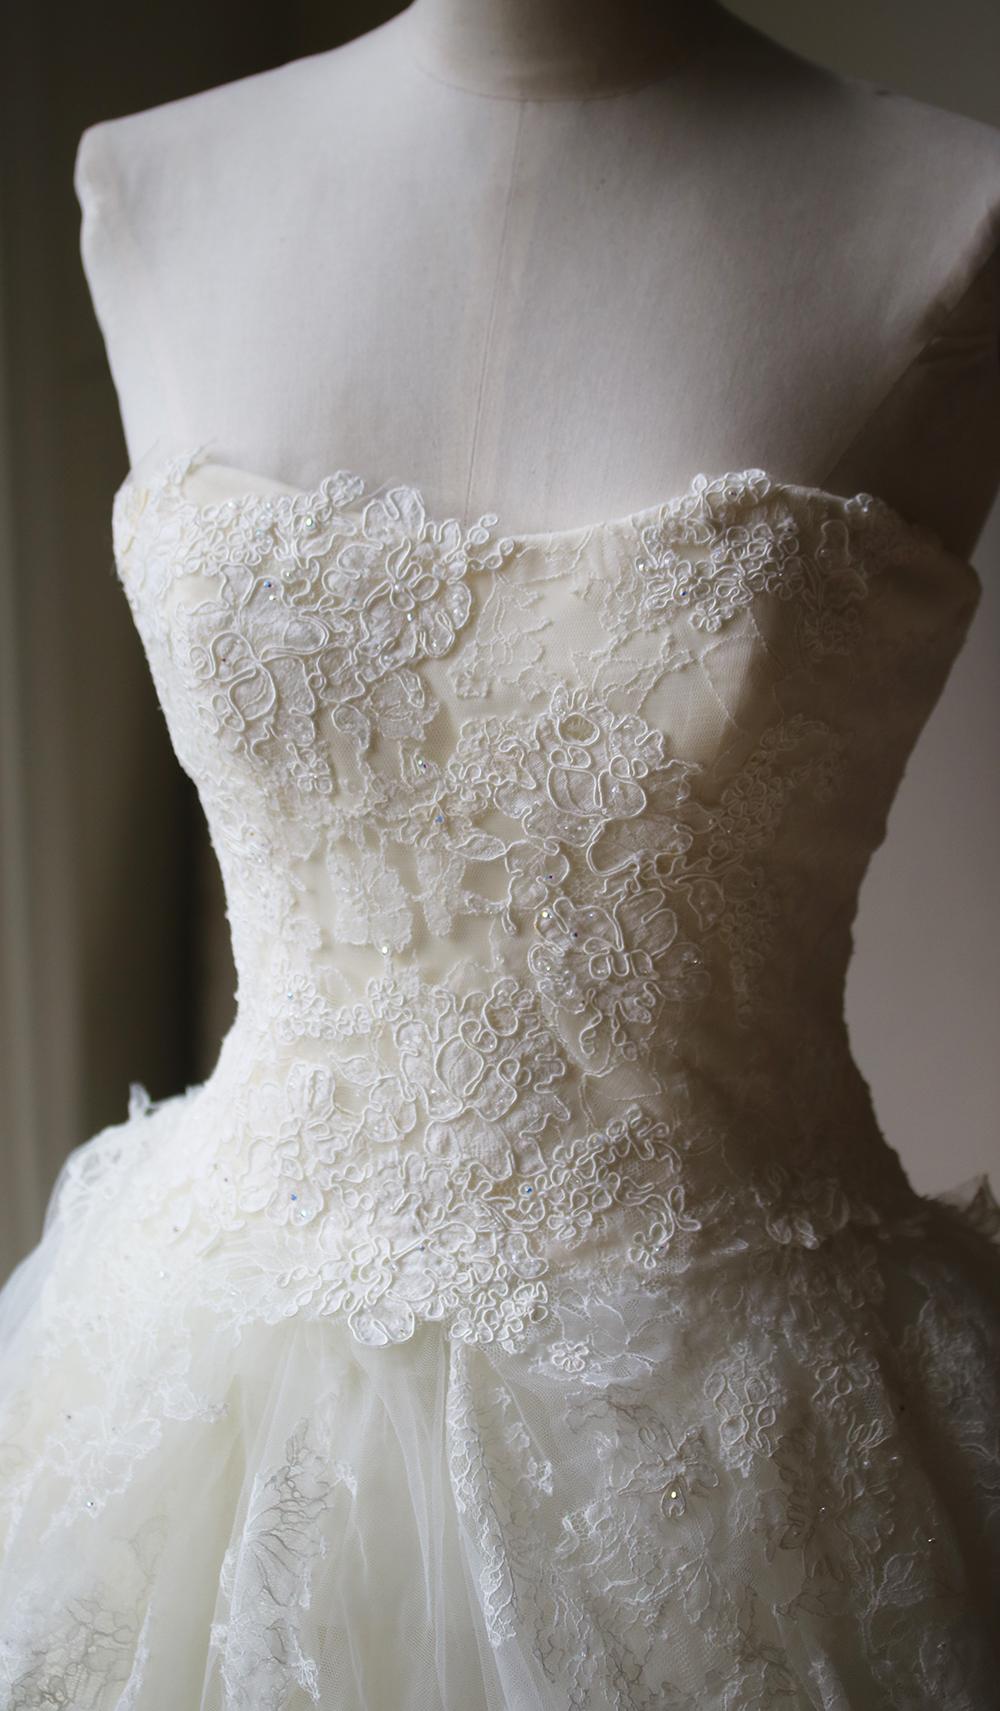 This Vera Wang Luxe wedding dress is truly an exquisite, couture creation, the workmanship is beautiful! Soft sweetheart strapless embellished boned bodice with zip fastening. Ornate silk-organza ribbon detail down the back. Frothy full layered